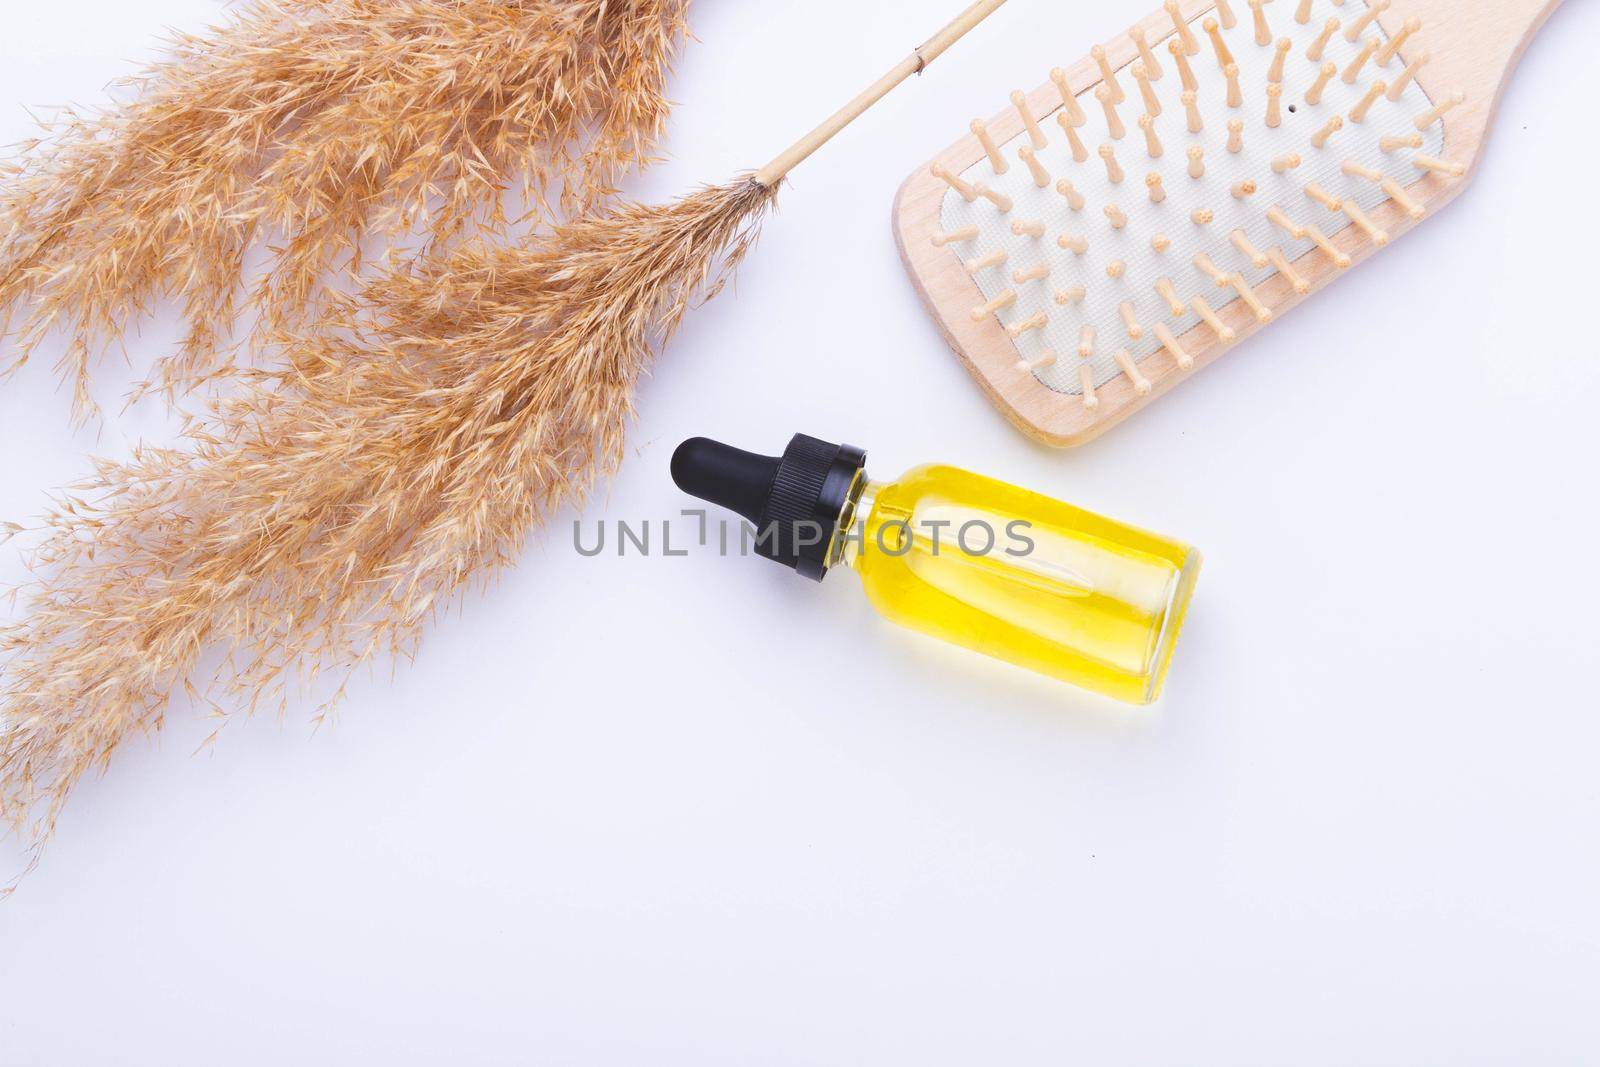 Oil for hair growth. Therapeutic oil to activate hair growth. Comb on white background. Hair care. Beauty and health.